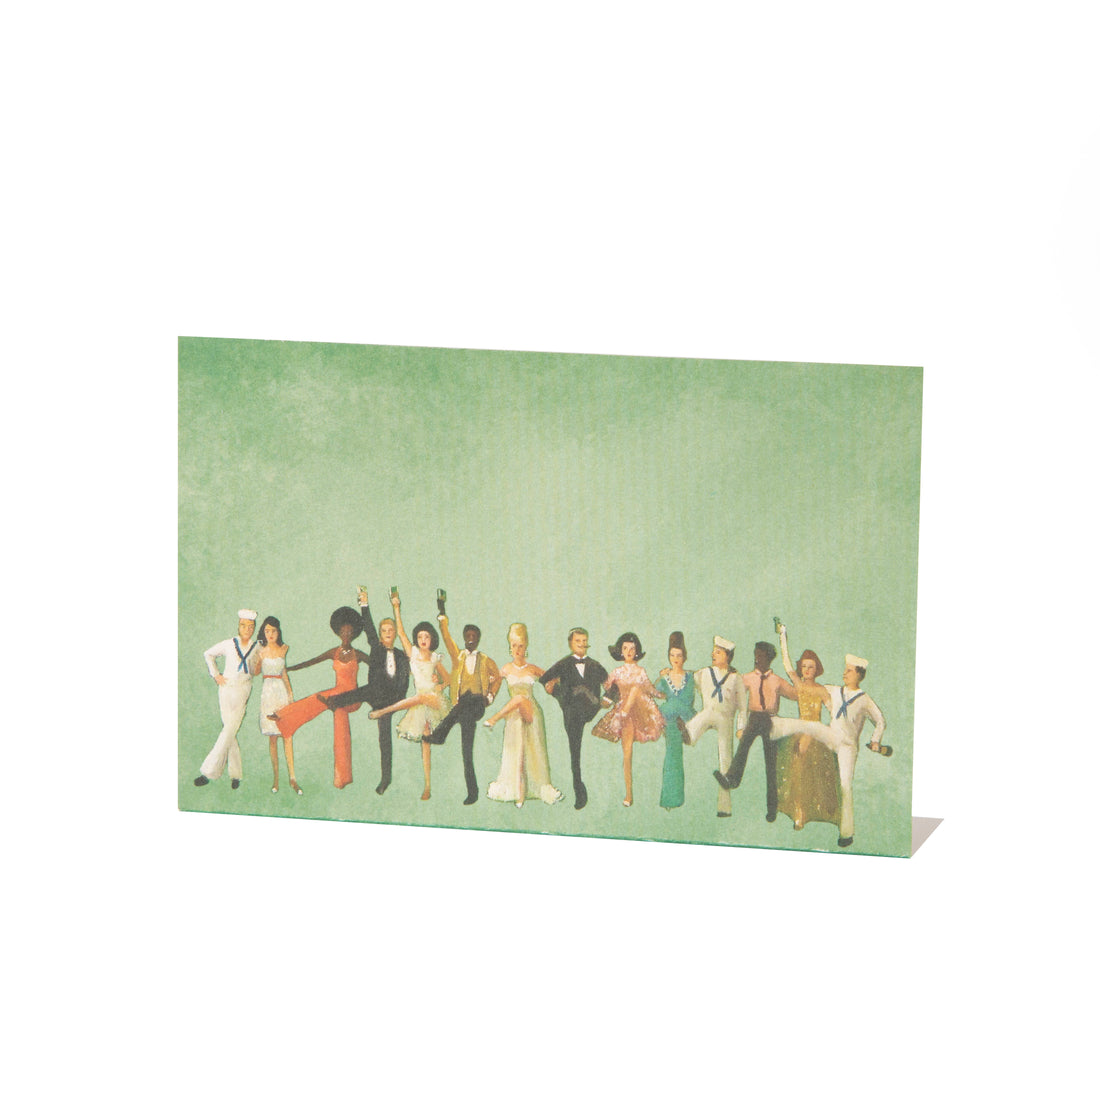 A rectangular freestanding place card featuring a row of jubilant partiers dancing along the bottom of the card in vintage outfits, on a green background. 